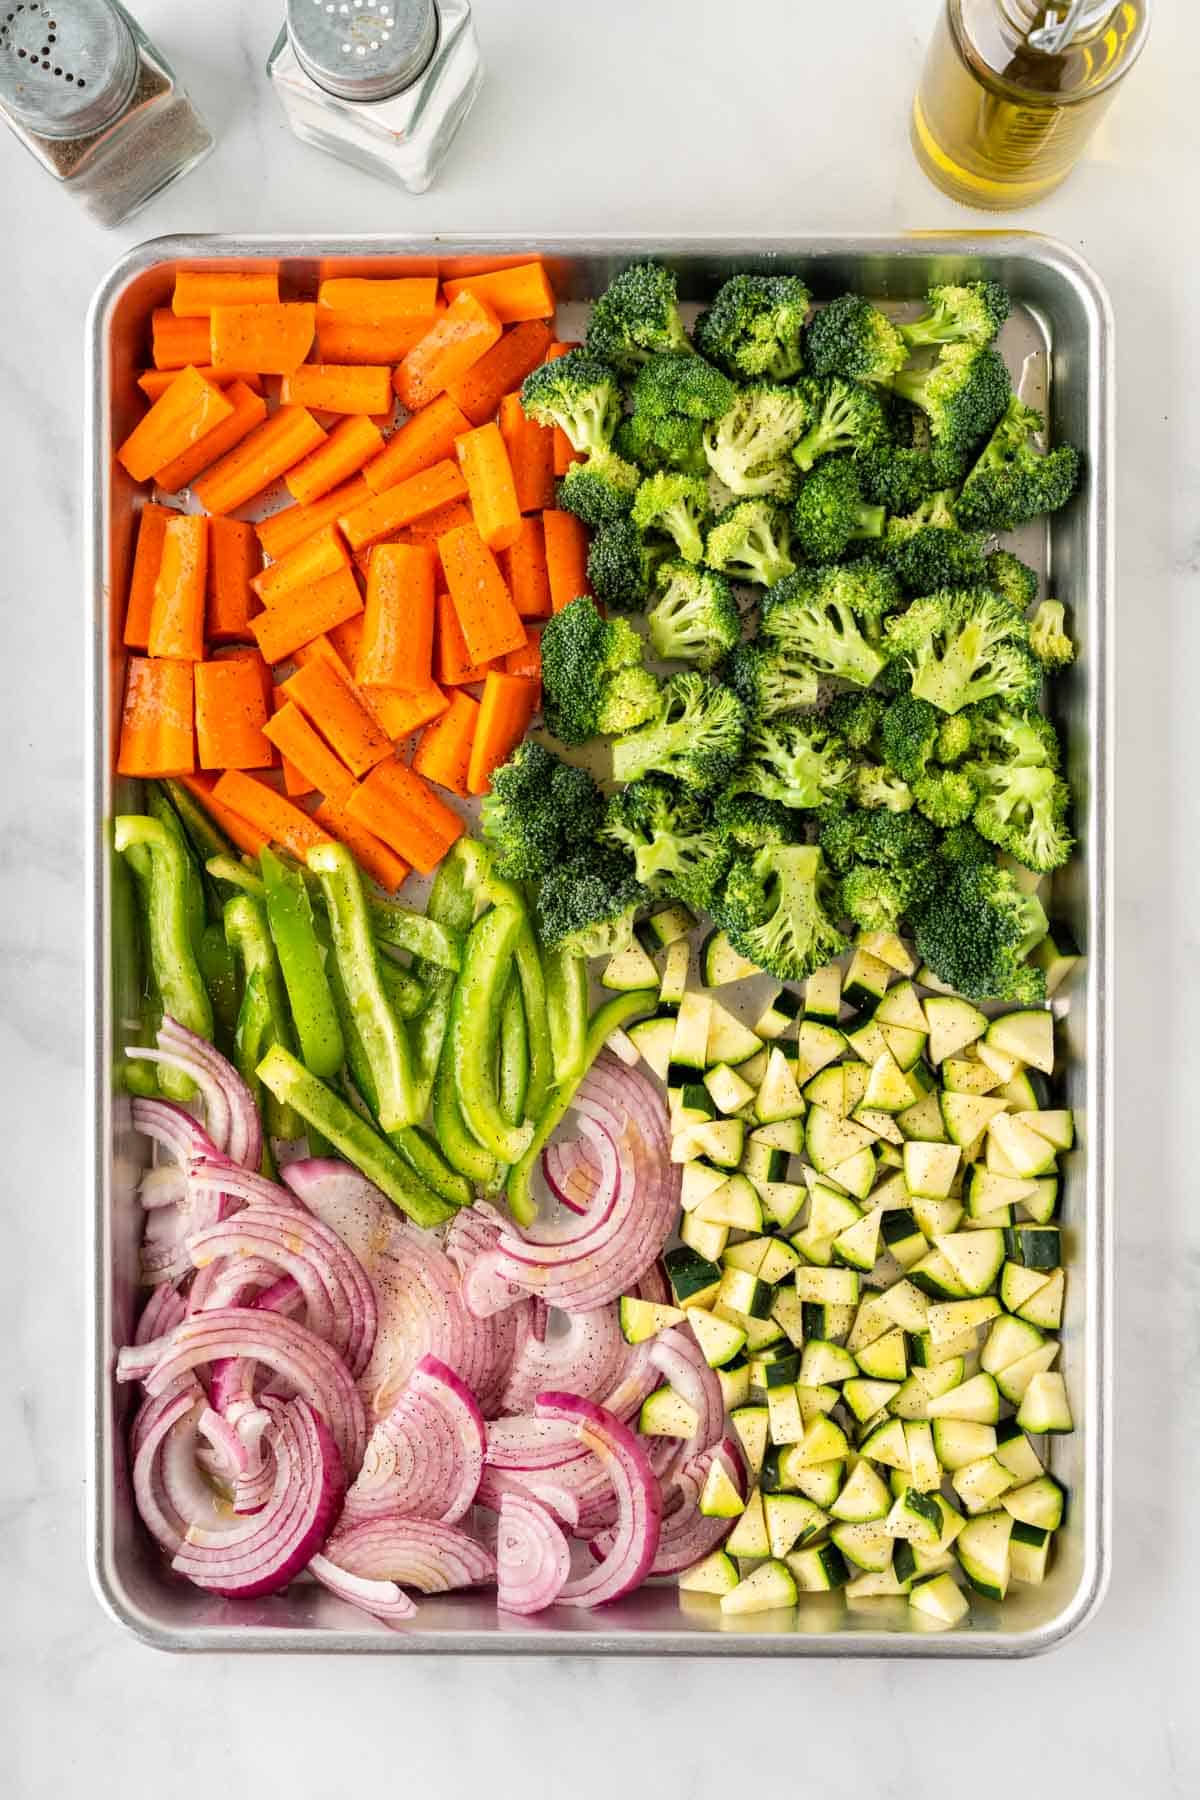 carrots, broccoli, bell peppers, onion, and zucchini on a baking sheet